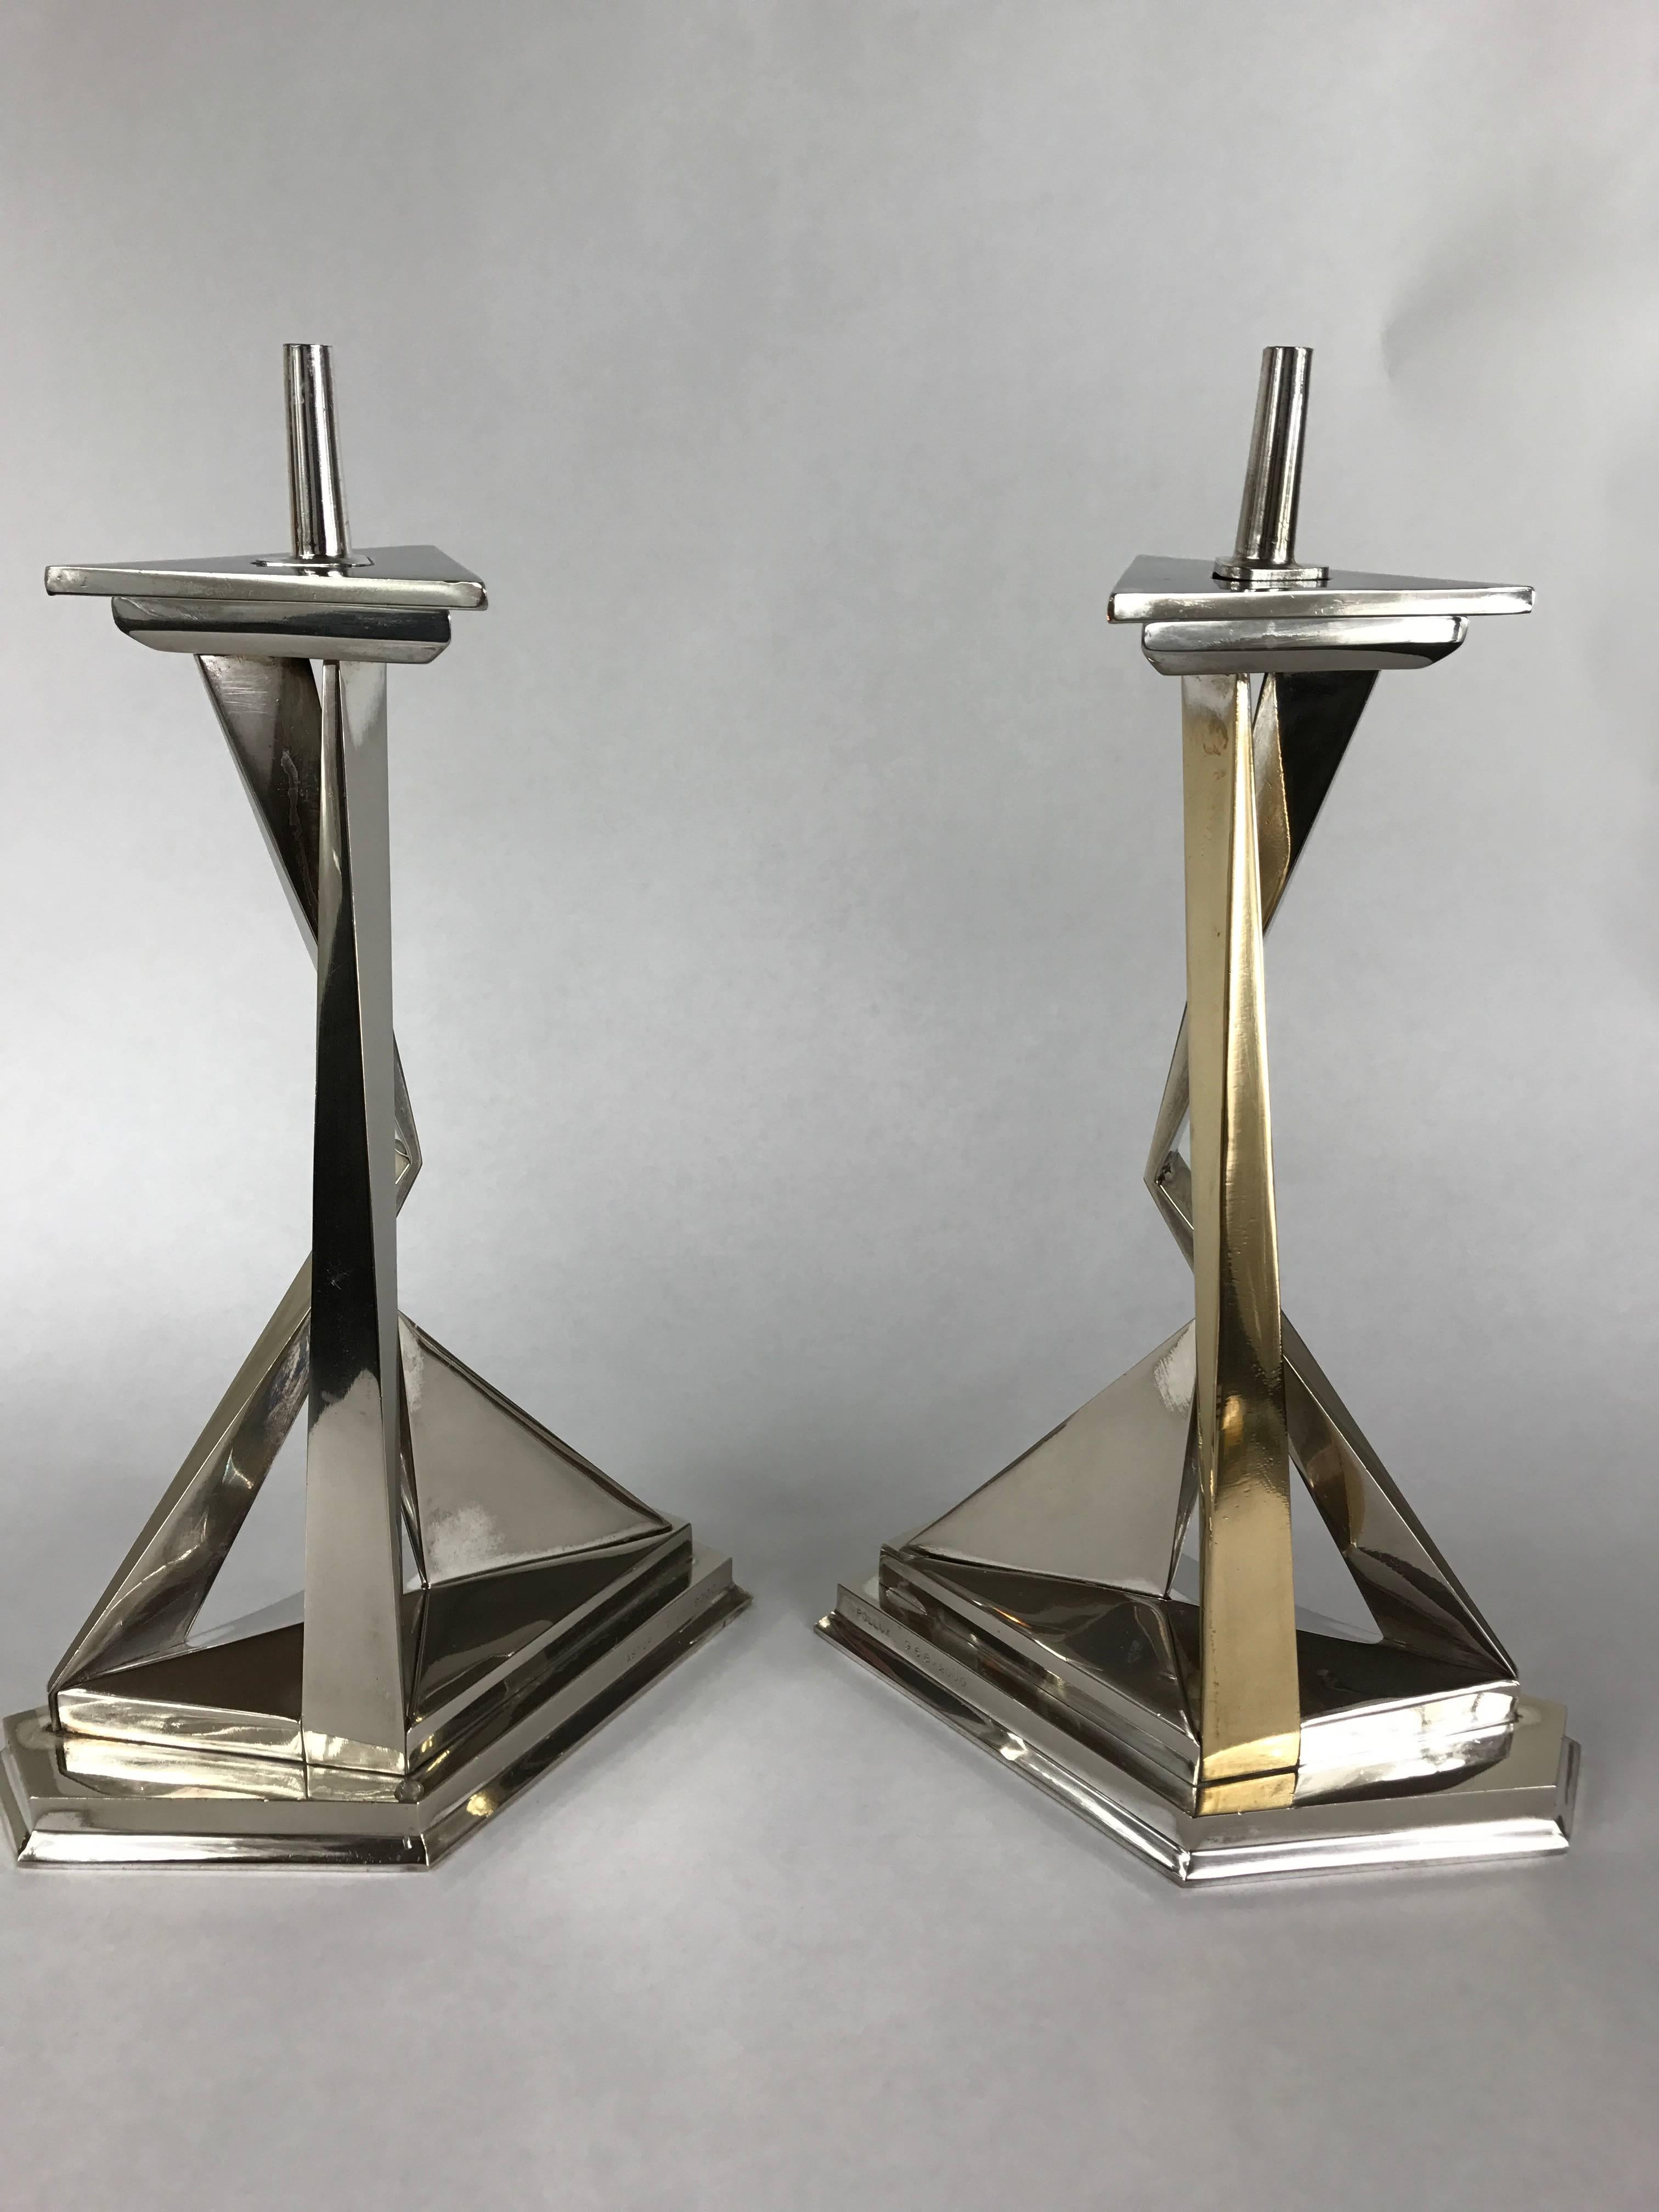 A pair of sculptural candlesticks by Salvador Dali. caster & Pollux, edition 968/2000. Includes two flat top fitters. Nickel and brass plated bronze.